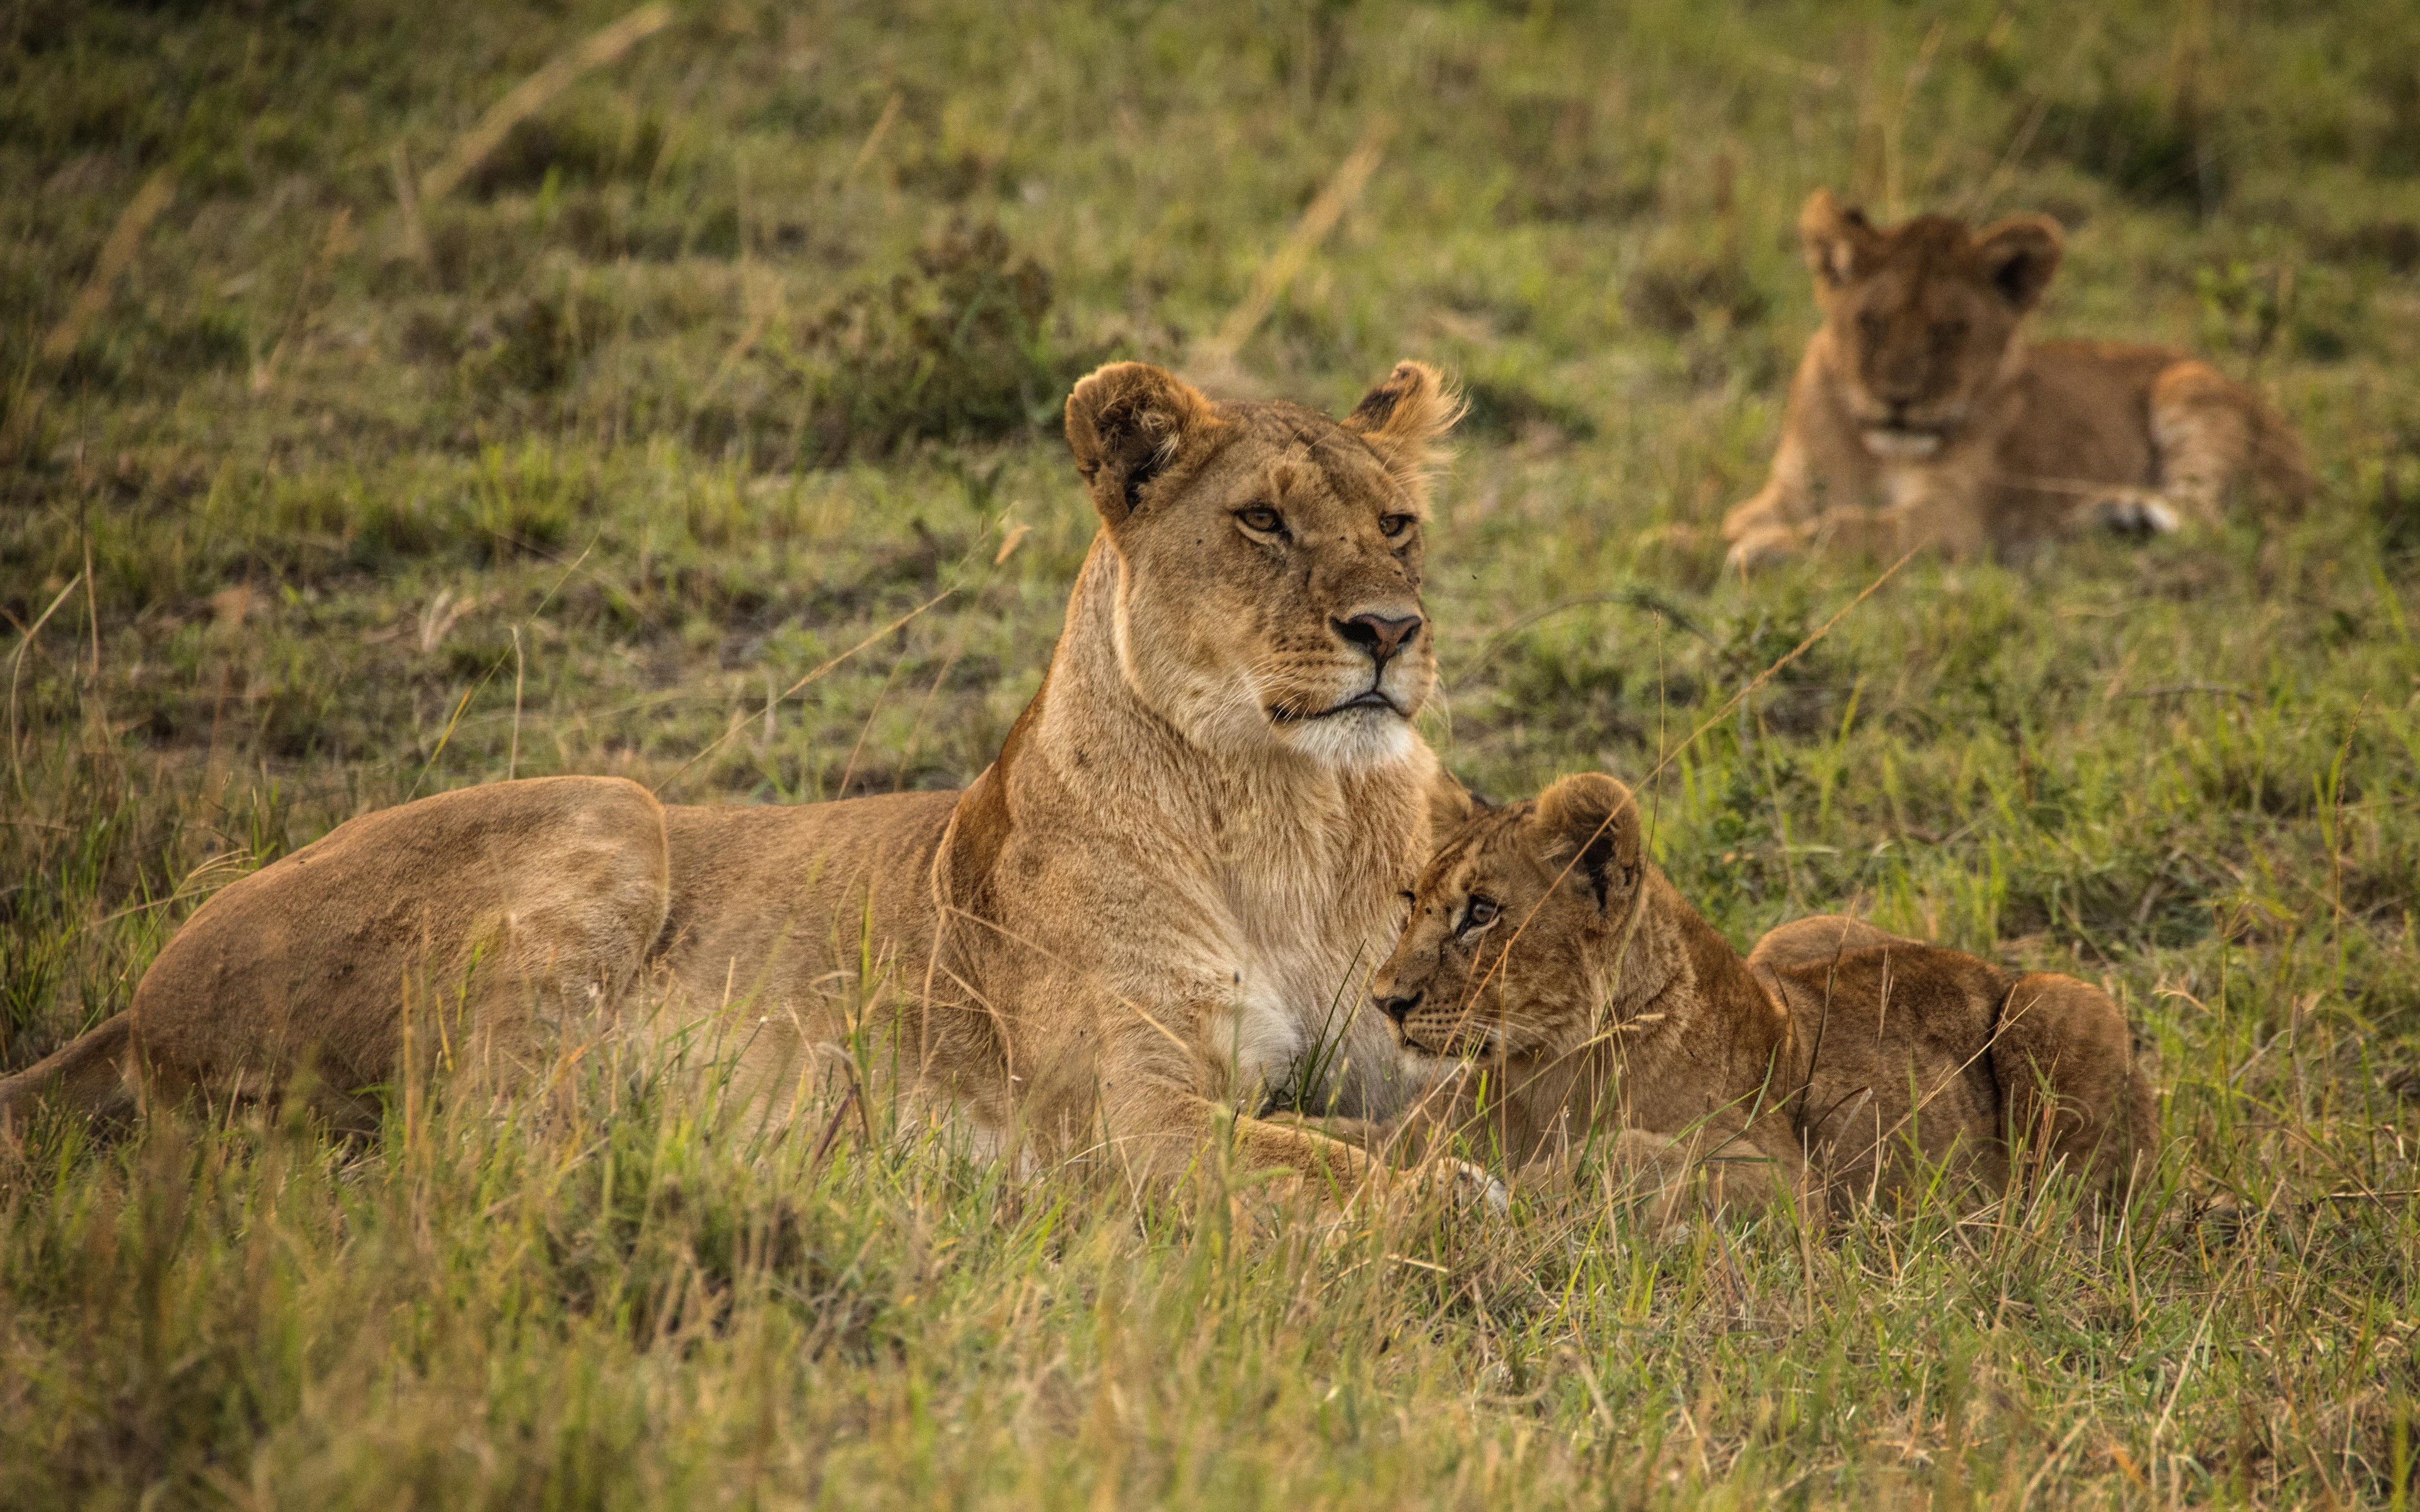 Lioness with cubs from Serengeti wallpaper 3840x2400